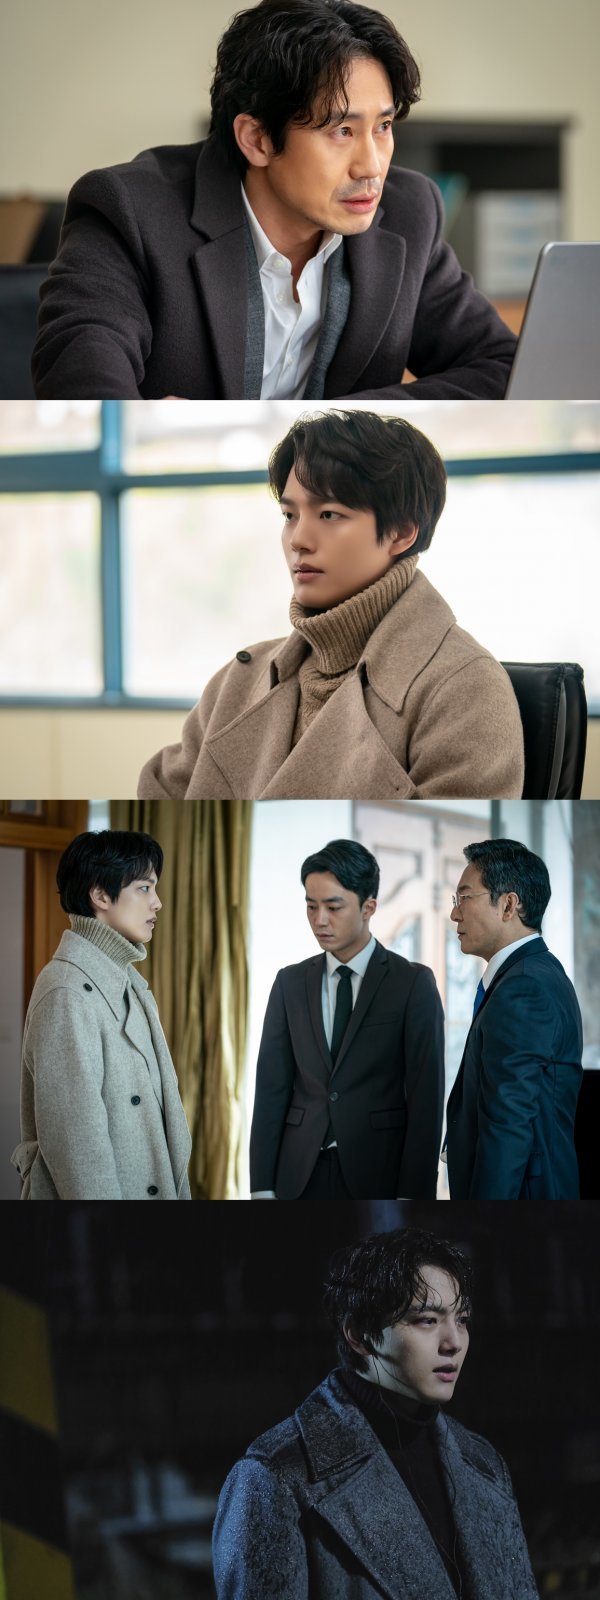 The precarious change in Yeo Jin-goo was detected.The sudden action of Move-style, which came to the hearing of Han Ki-hwan (Choi Jin-ho), confused viewers.Move-style arrested Han-joo One on charges of abuse and abetting his authority on the murder case of Lee Geum-hwa (Cha Chung-hwa).Here, the meaningful face of One, a move for Han Ki-hwan, predicted a blue again.Move-Sik, who was appointed to the Seoul Metropolitan Offices inspection team under Hans proposal, arrested Han Ki-hwans son and his partner, Han Ju One, at the hearing.Unlike Han Ki-hwan, who was in shock, the appearance of One, which seemed to be unexpected, made viewers wonder, while Move-sik and One, who face each other in the inspection room.The image of One, who is under investigation by Move-style in the public photo, is sinking in a frighteningly cold manner.In the 14th trailer released earlier, he was caught in the one week of putting down the police ID card, saying, I do not think I need to go back to where I was.In particular, Move raises the question of why he arrested him at a high-profile hearing.The appearance of One, who confronts his father Han Ki-hwan, also adds tension. When the variables intervene in the place he has hoped for for a lifetime, Han Ki-hwans anger reaches the peak.One week, one week, and one week, with the rain all over his body, is at stake, and his anger is soaked.What is the shocking truth that One, who has begun to dig into his fathers secrets persistently, will face?In the 14th episode, which airs on the 3rd, Move-style and One One come to the truth. Monster production team said, Todays 14th broadcast reveals the whole story of Lee Yu-yeons case 21 years ago.Move is Lee Chang-jin, and Han-joo One is going to play a game to reveal the secret of his father Han Ki-hwan. Please pay attention to what variables the anger of Han-joo facing the truth will bring and how Move-sik will solve it.The choice of two men like Monster is driving a storm, and the unpredictable move will give a thrilling catharsis. The 14th episode of Monster will air at 11 p.m. on the 3rd.